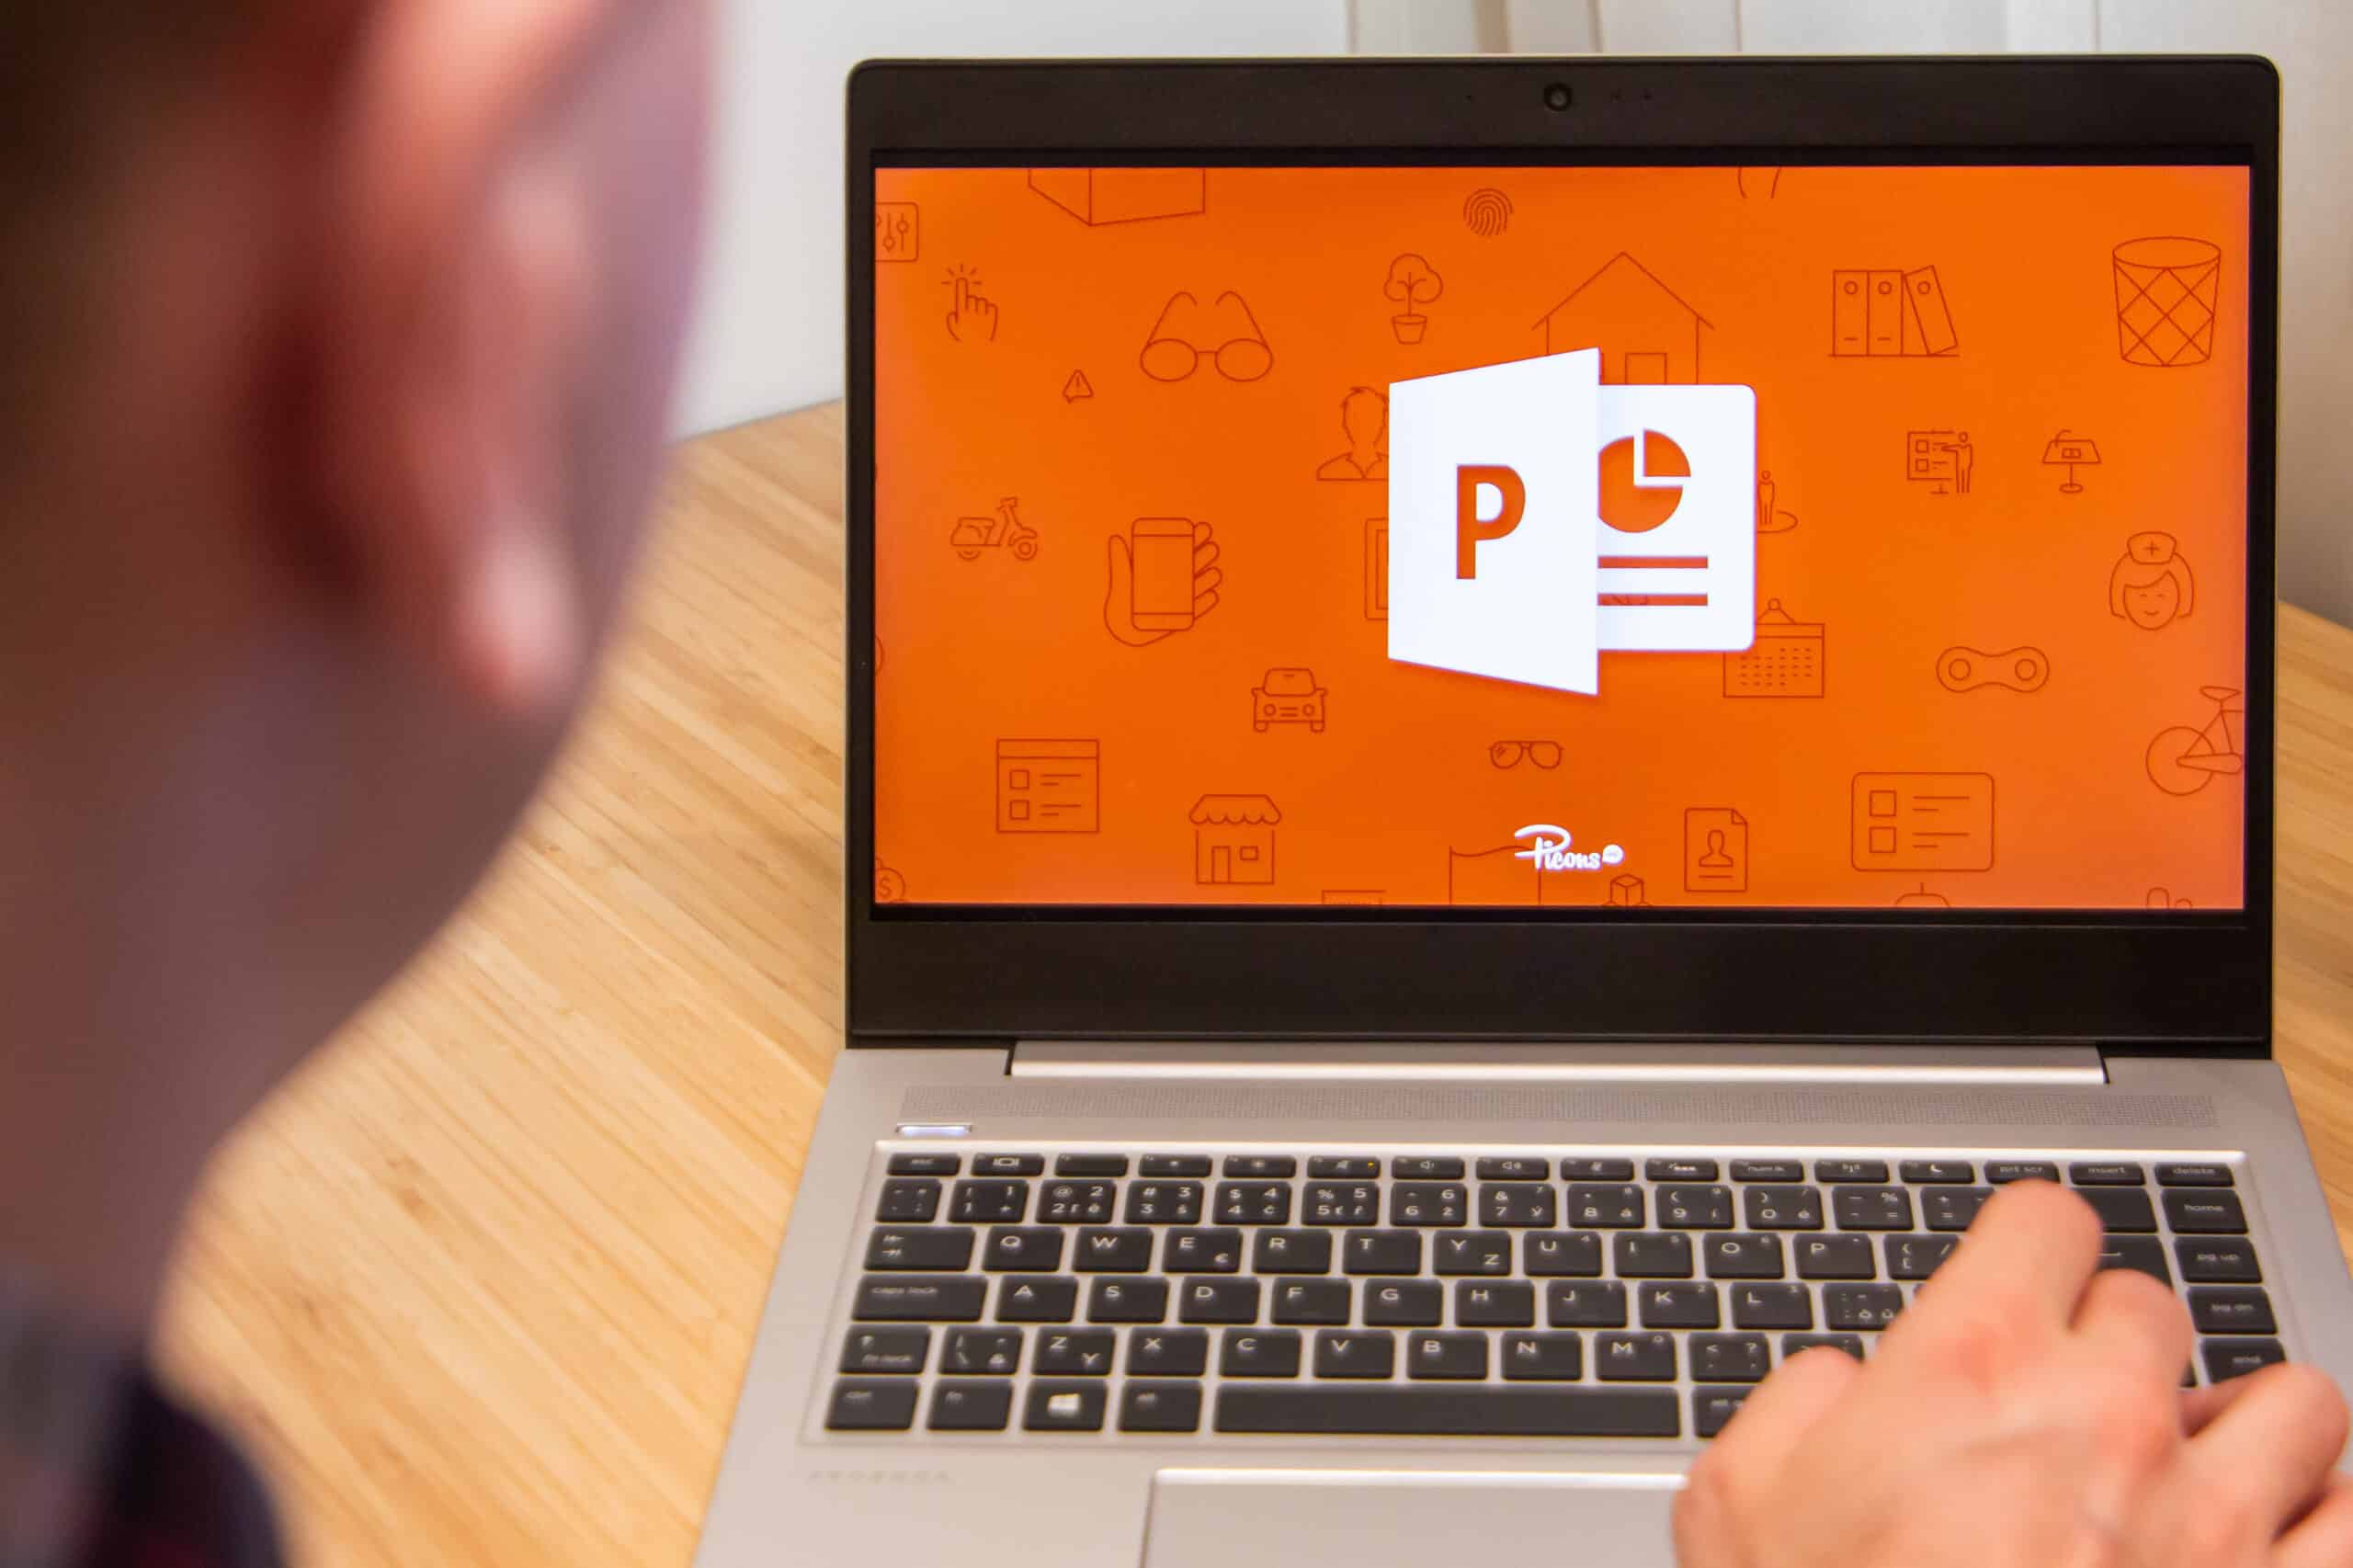 PowerPoint is used by a man on a laptop